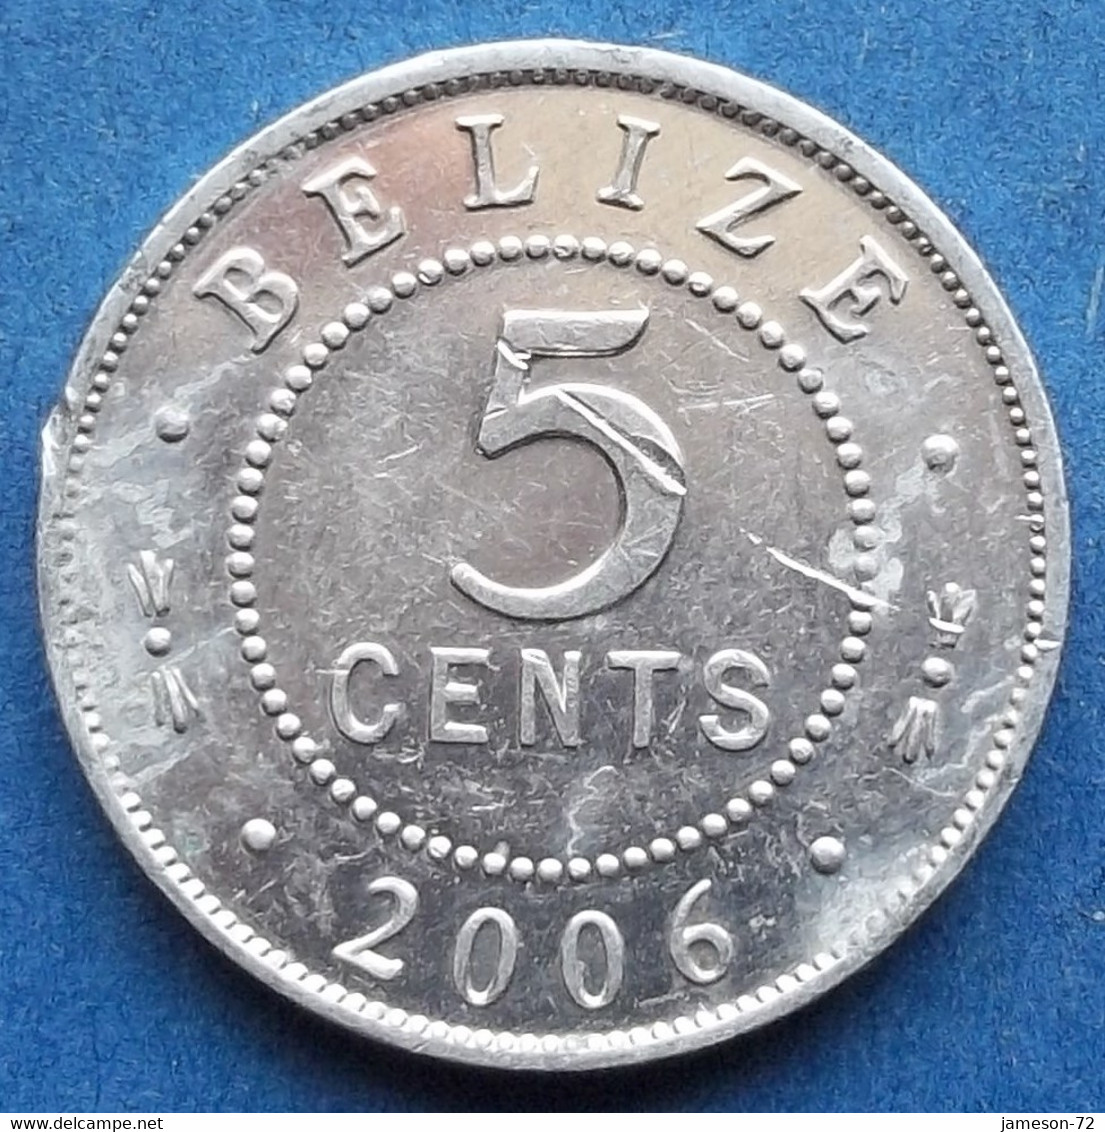 BELIZE - 5 Cents 2006 KM# 34a Independent Since 1973 - Edelweiss Coins - Belize